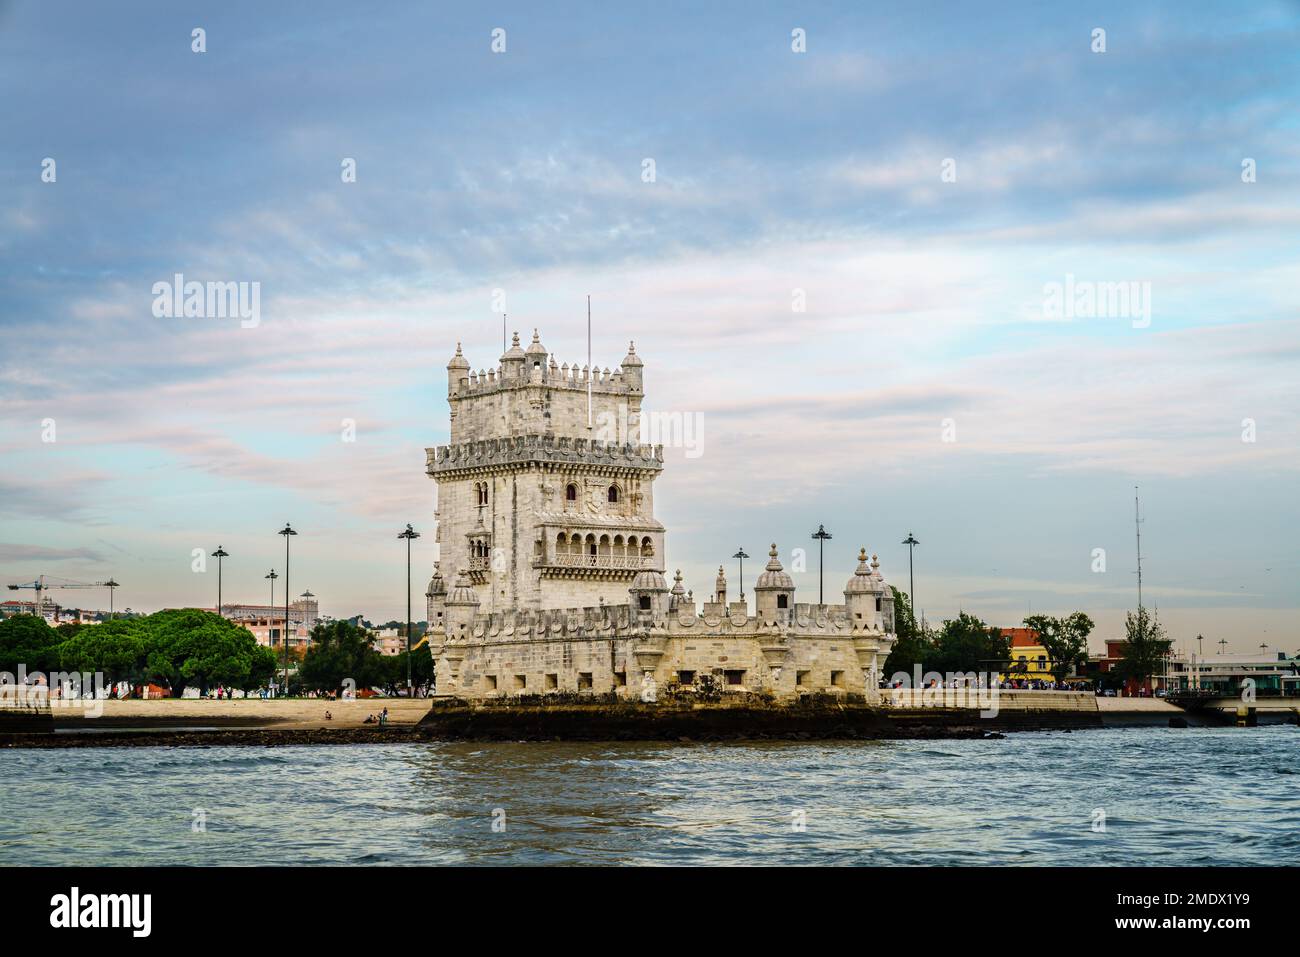 View of Torre de Belem or Bethlehem Tower fromt the Tagus River in Lisbon, Portugal Stock Photo